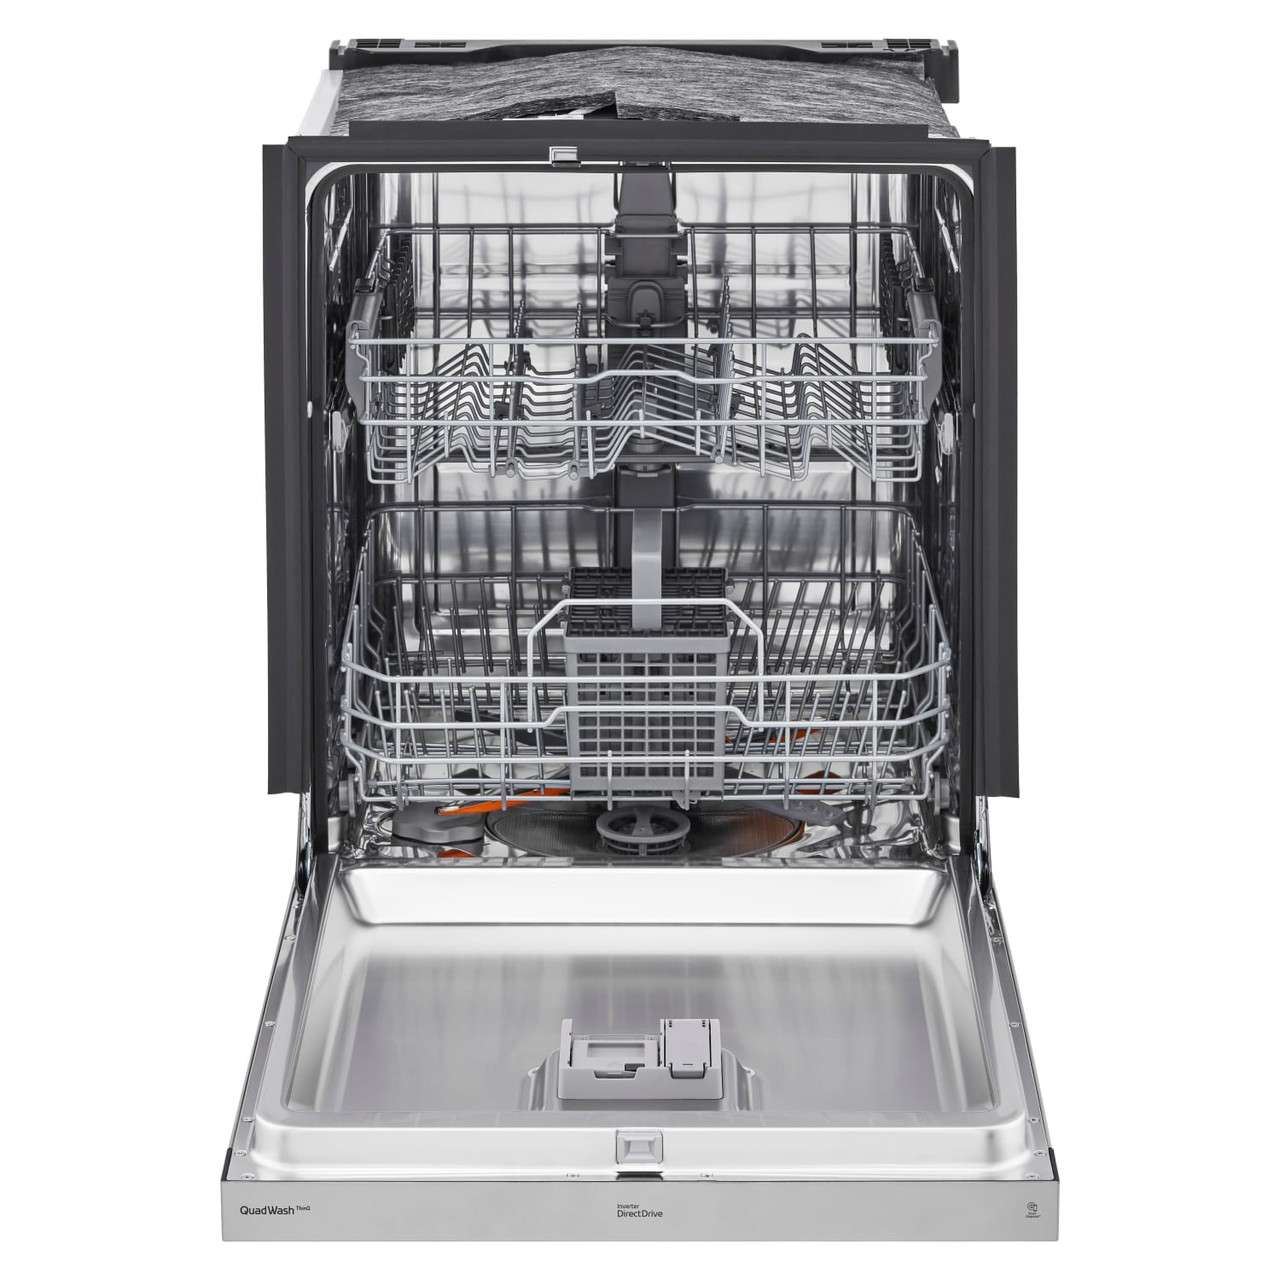 LG ADA Front Control Smart Wi-Fi Enabled Dishwasher with QuadWash - ADFD5448AT